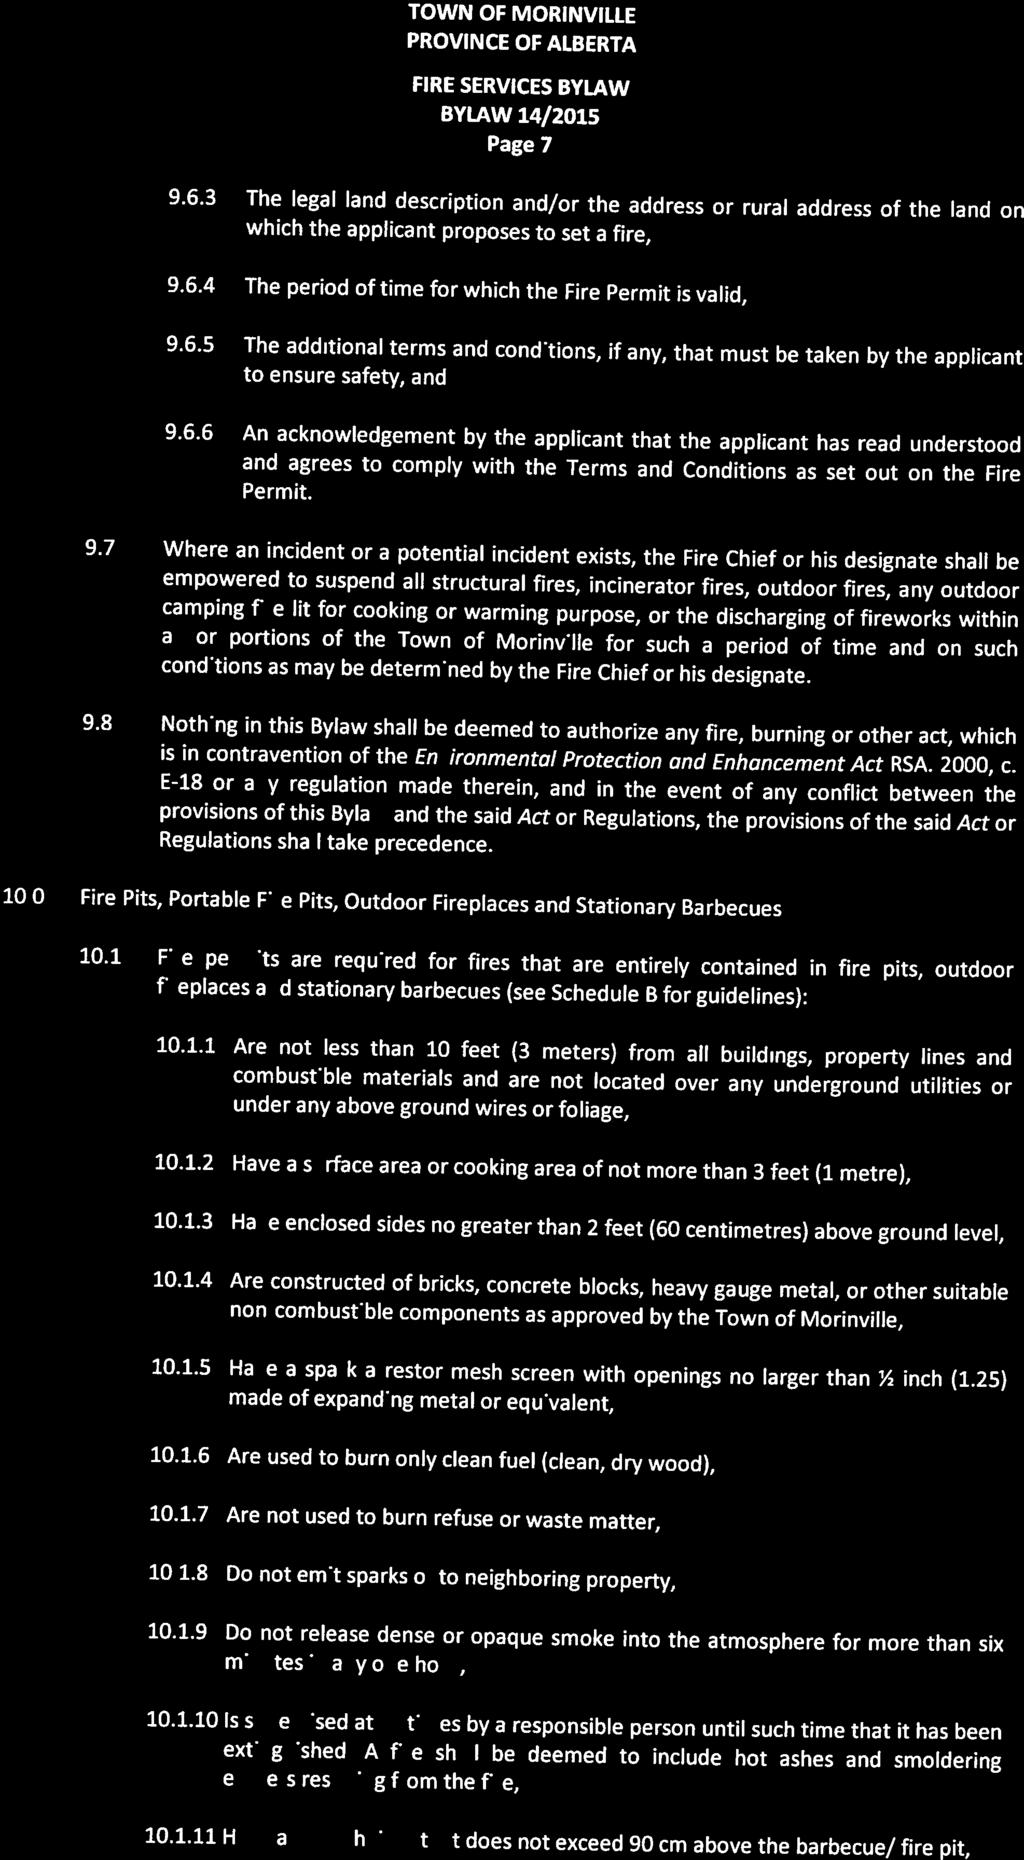 Page 7 9.6.3 The legal land description and/or the address or rural address of the land on which the applicant proposes to set a fire, 9.6.4 The period of time for which the Fire Permit is valid, 9.6.5 The additional terms and conditions, if any, that must be taken by the applicant to ensure safety, and 9.